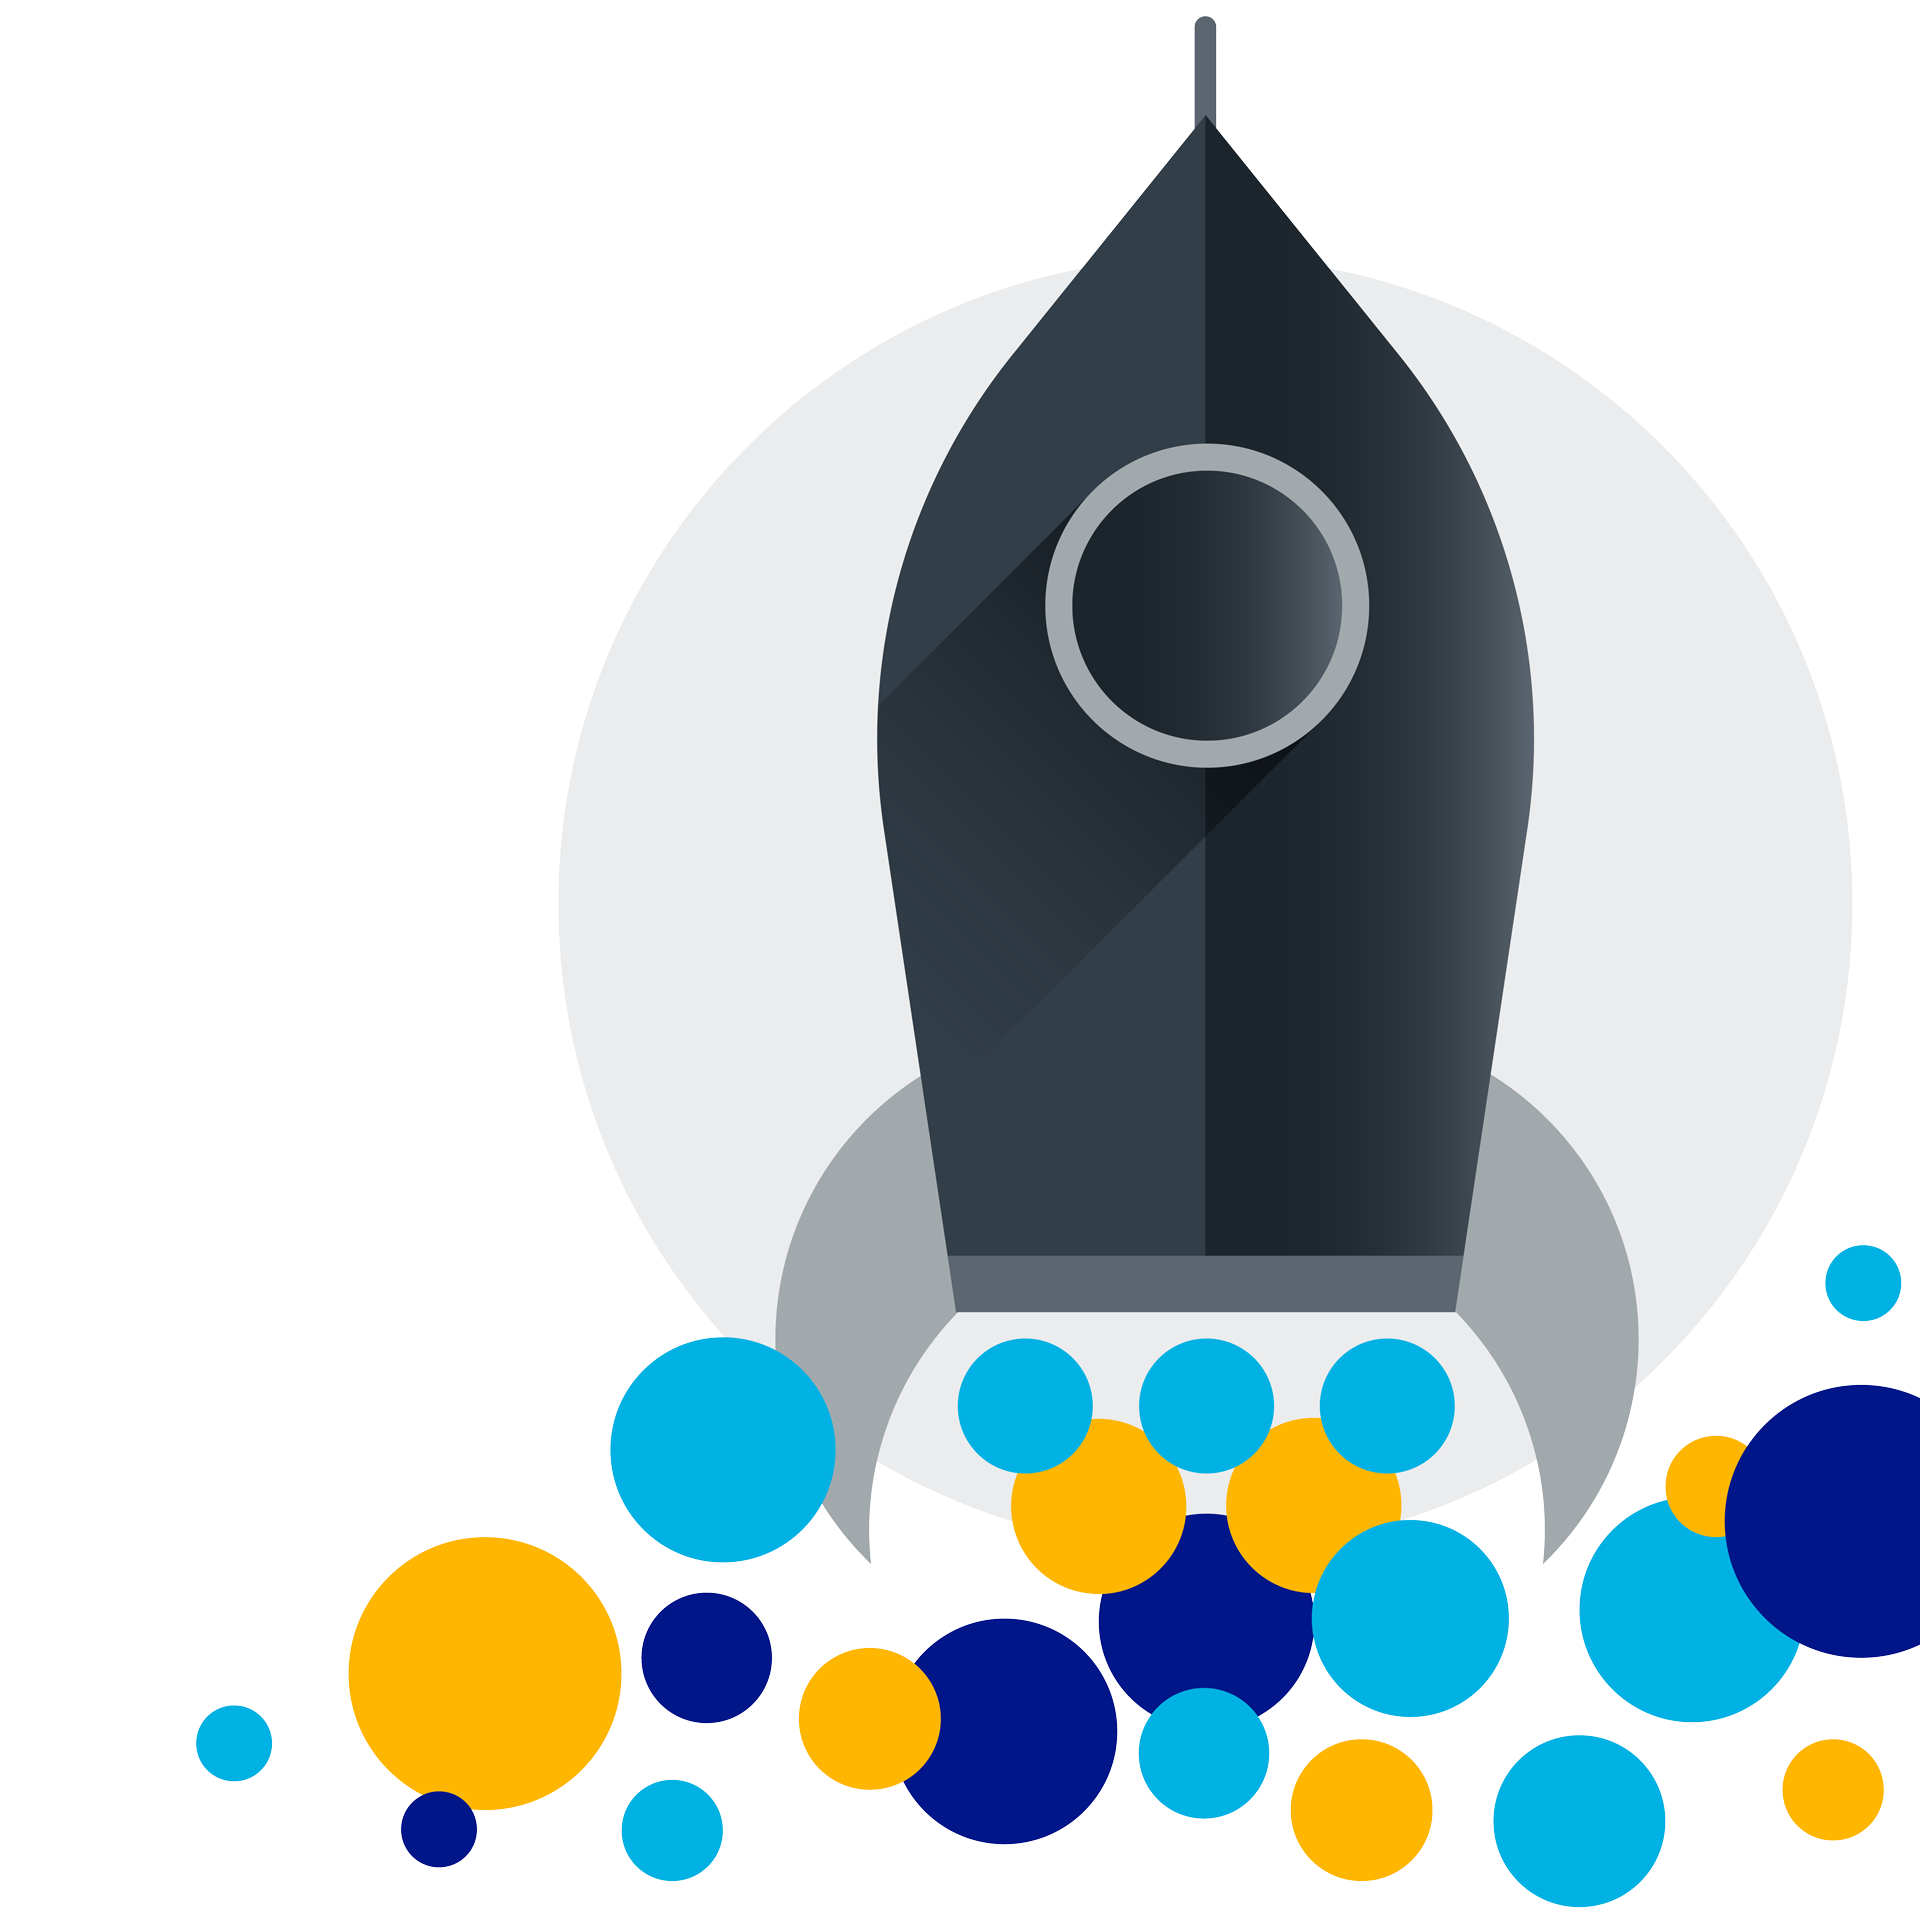 Graphic of a rocket ship representing our mission